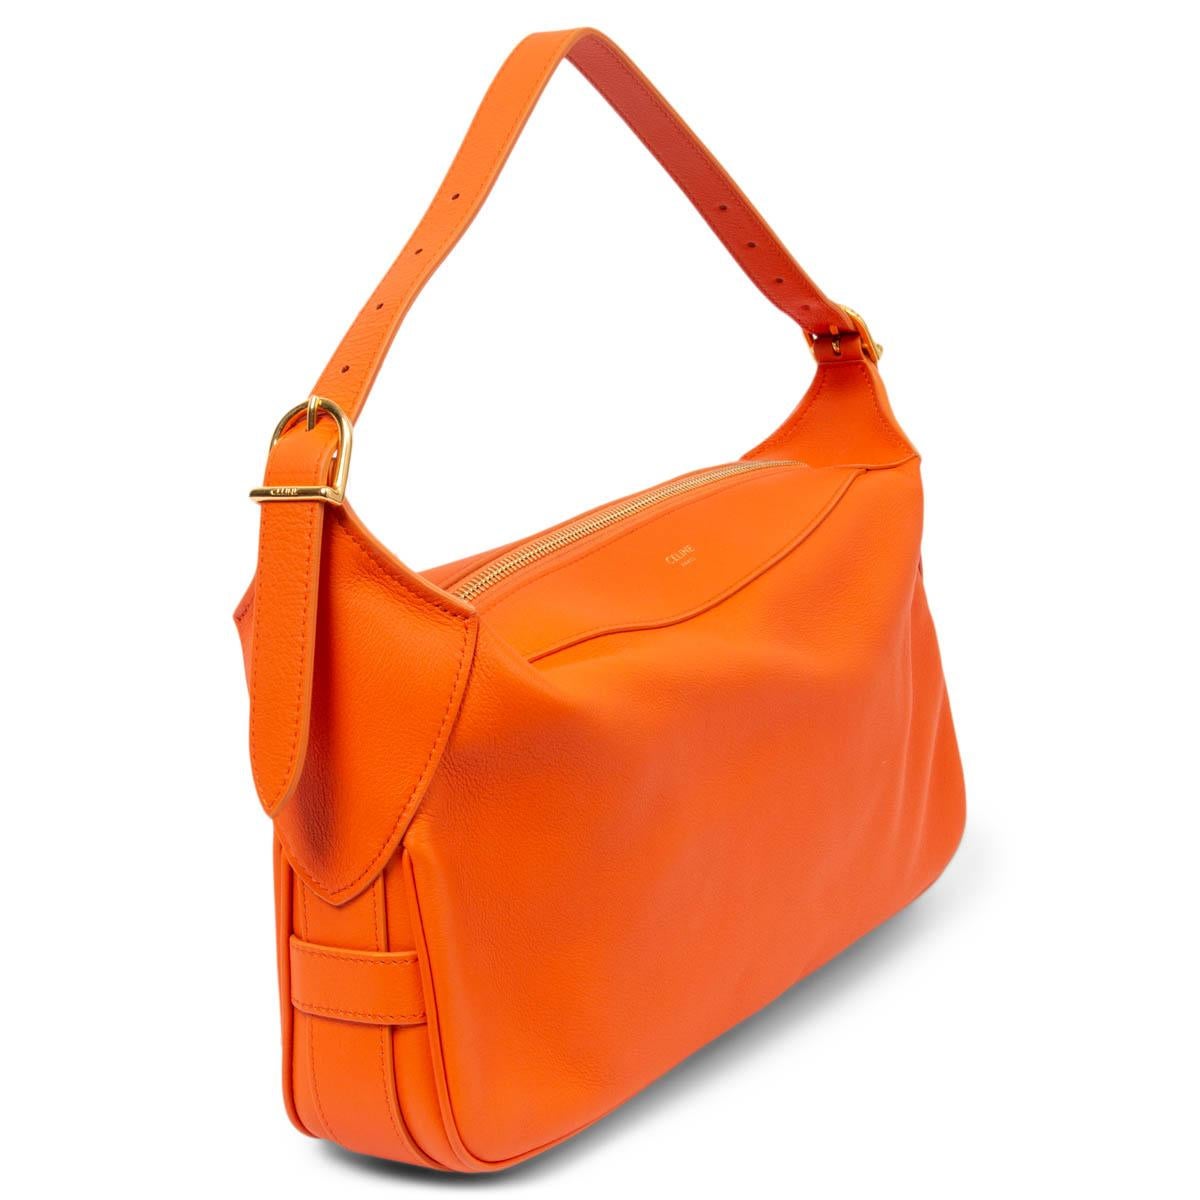 100% authentic Celine Medium Romy shoulder bag in orange supple calfskin featuring gold-tone hardware. Opens with a zipper on top and is lined in orange suede. The design comes with a adjustable handle. Has been carried and is in virtually new